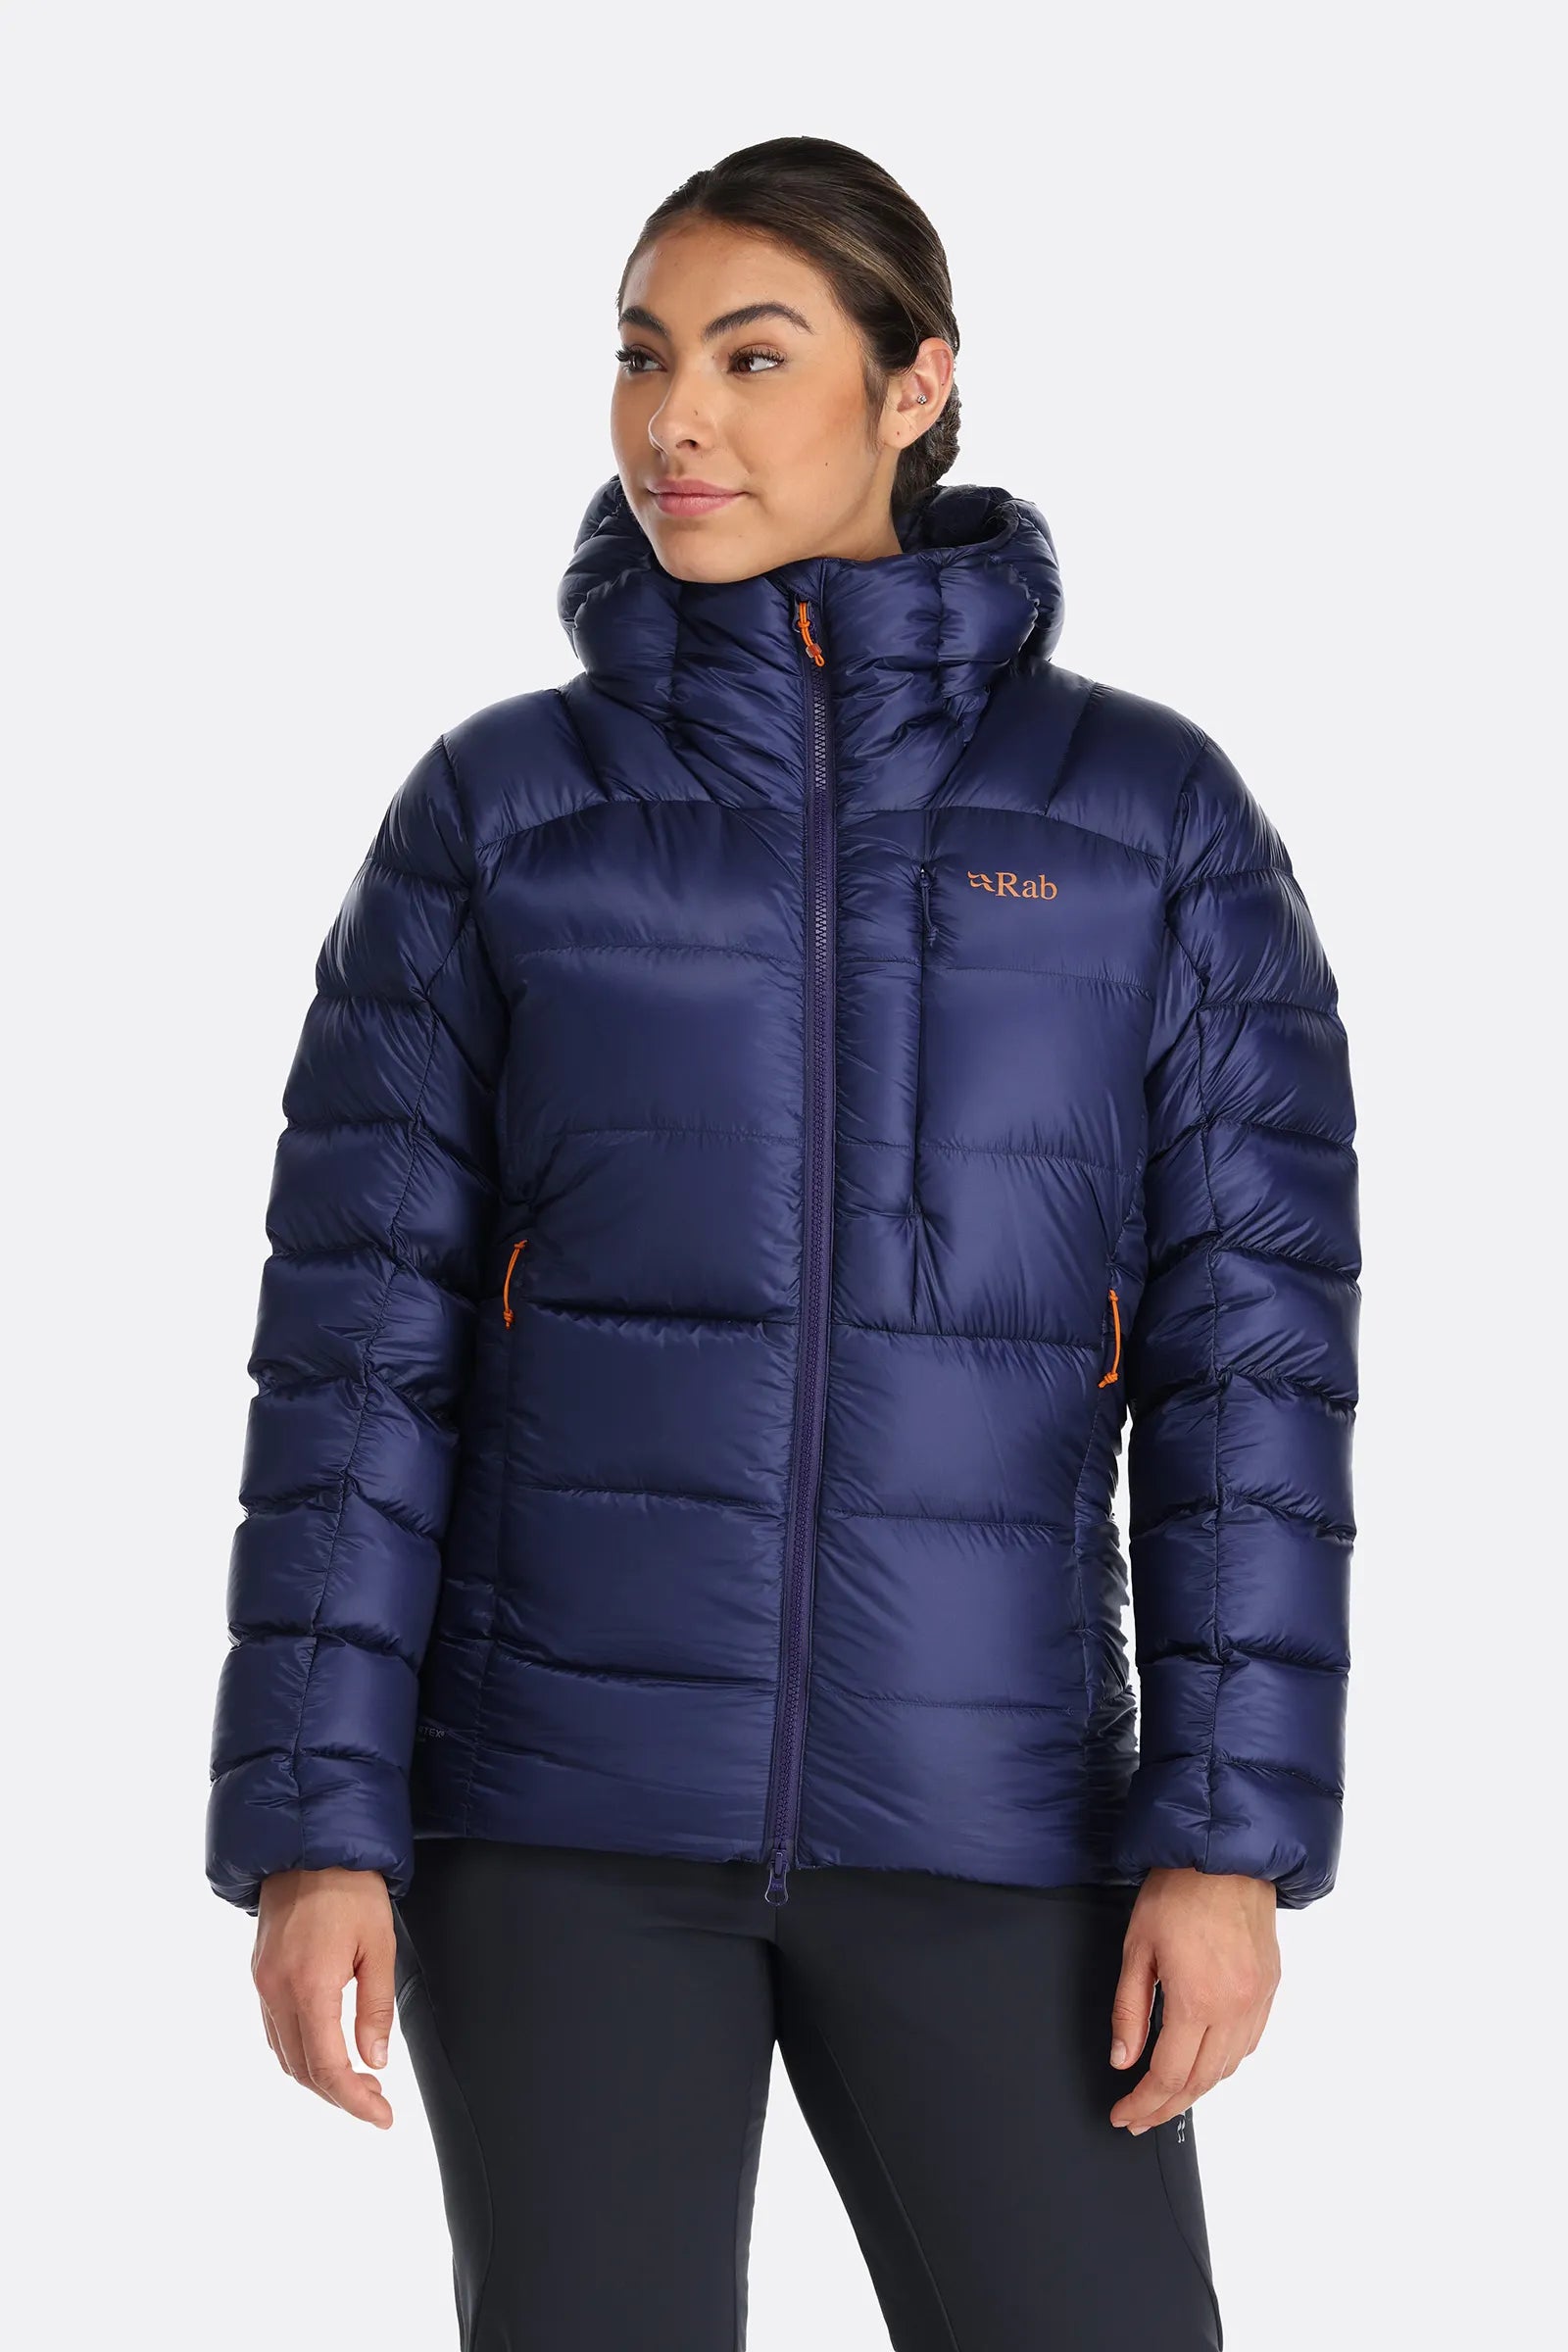 Rab Women's Mythic Ultra Down Jacket - Outfitters Store